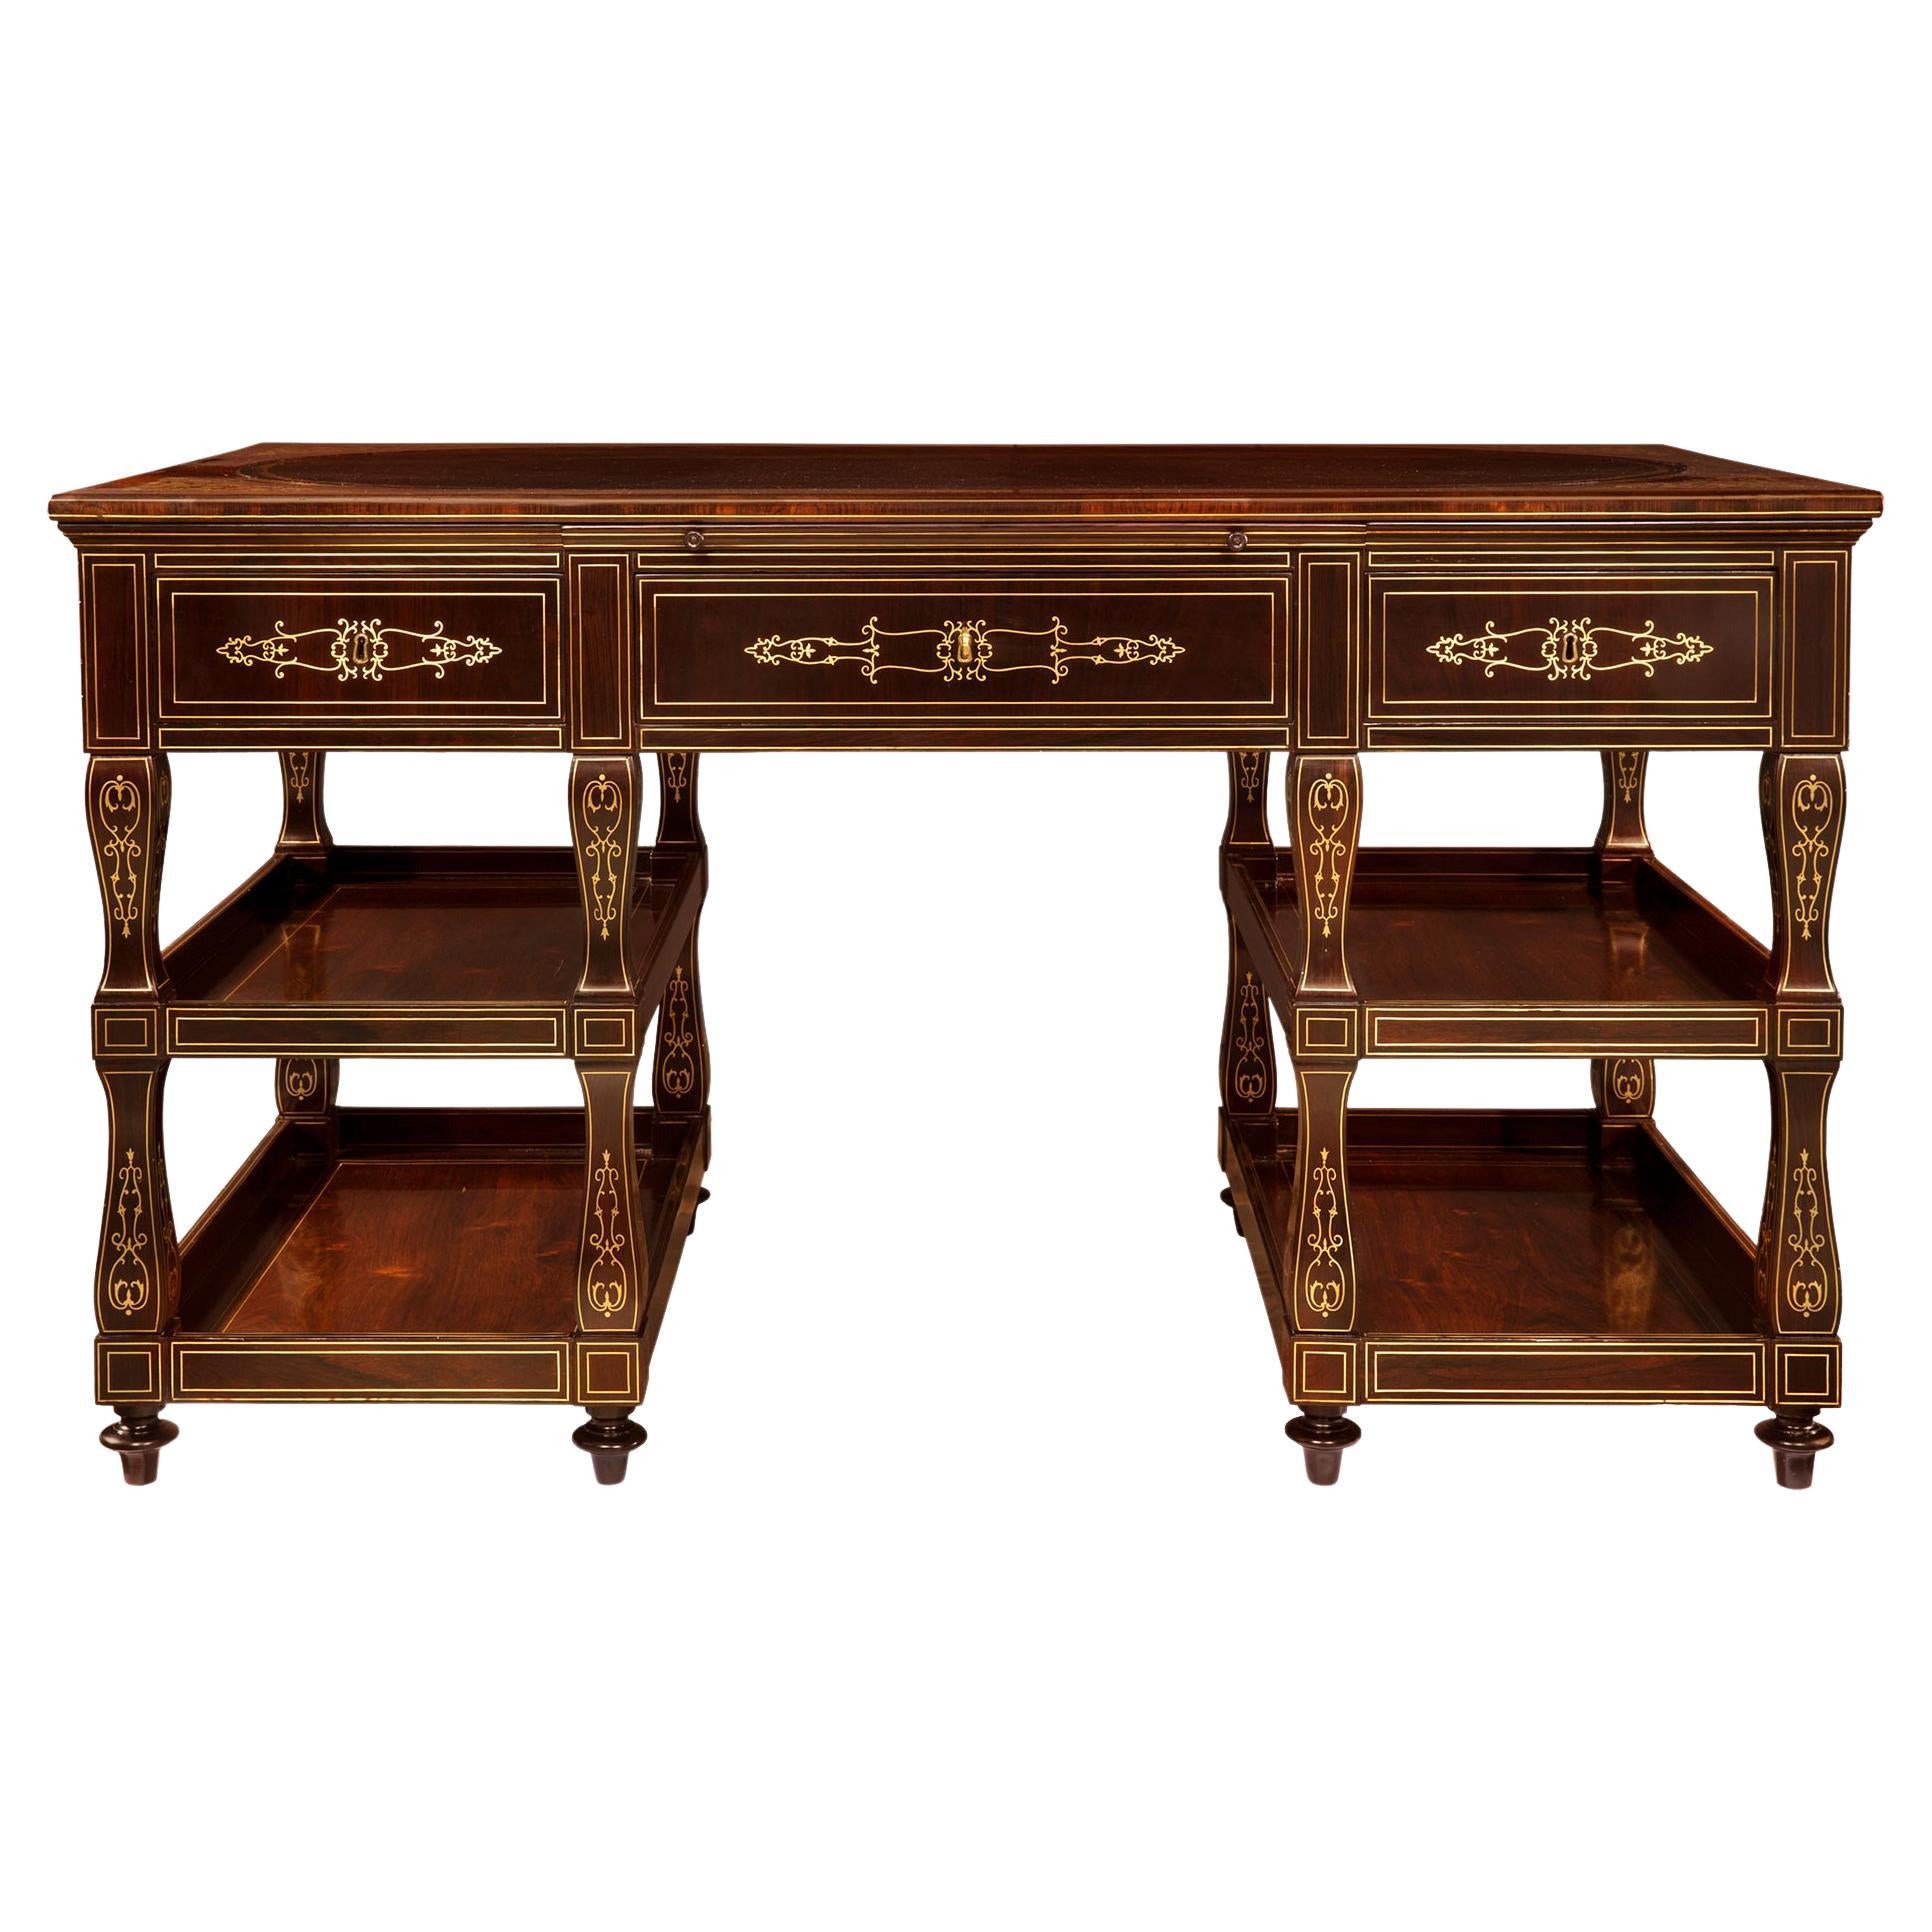 French 19th Century Charles X Period Rosewood and Brass Inlaid Desk For Sale